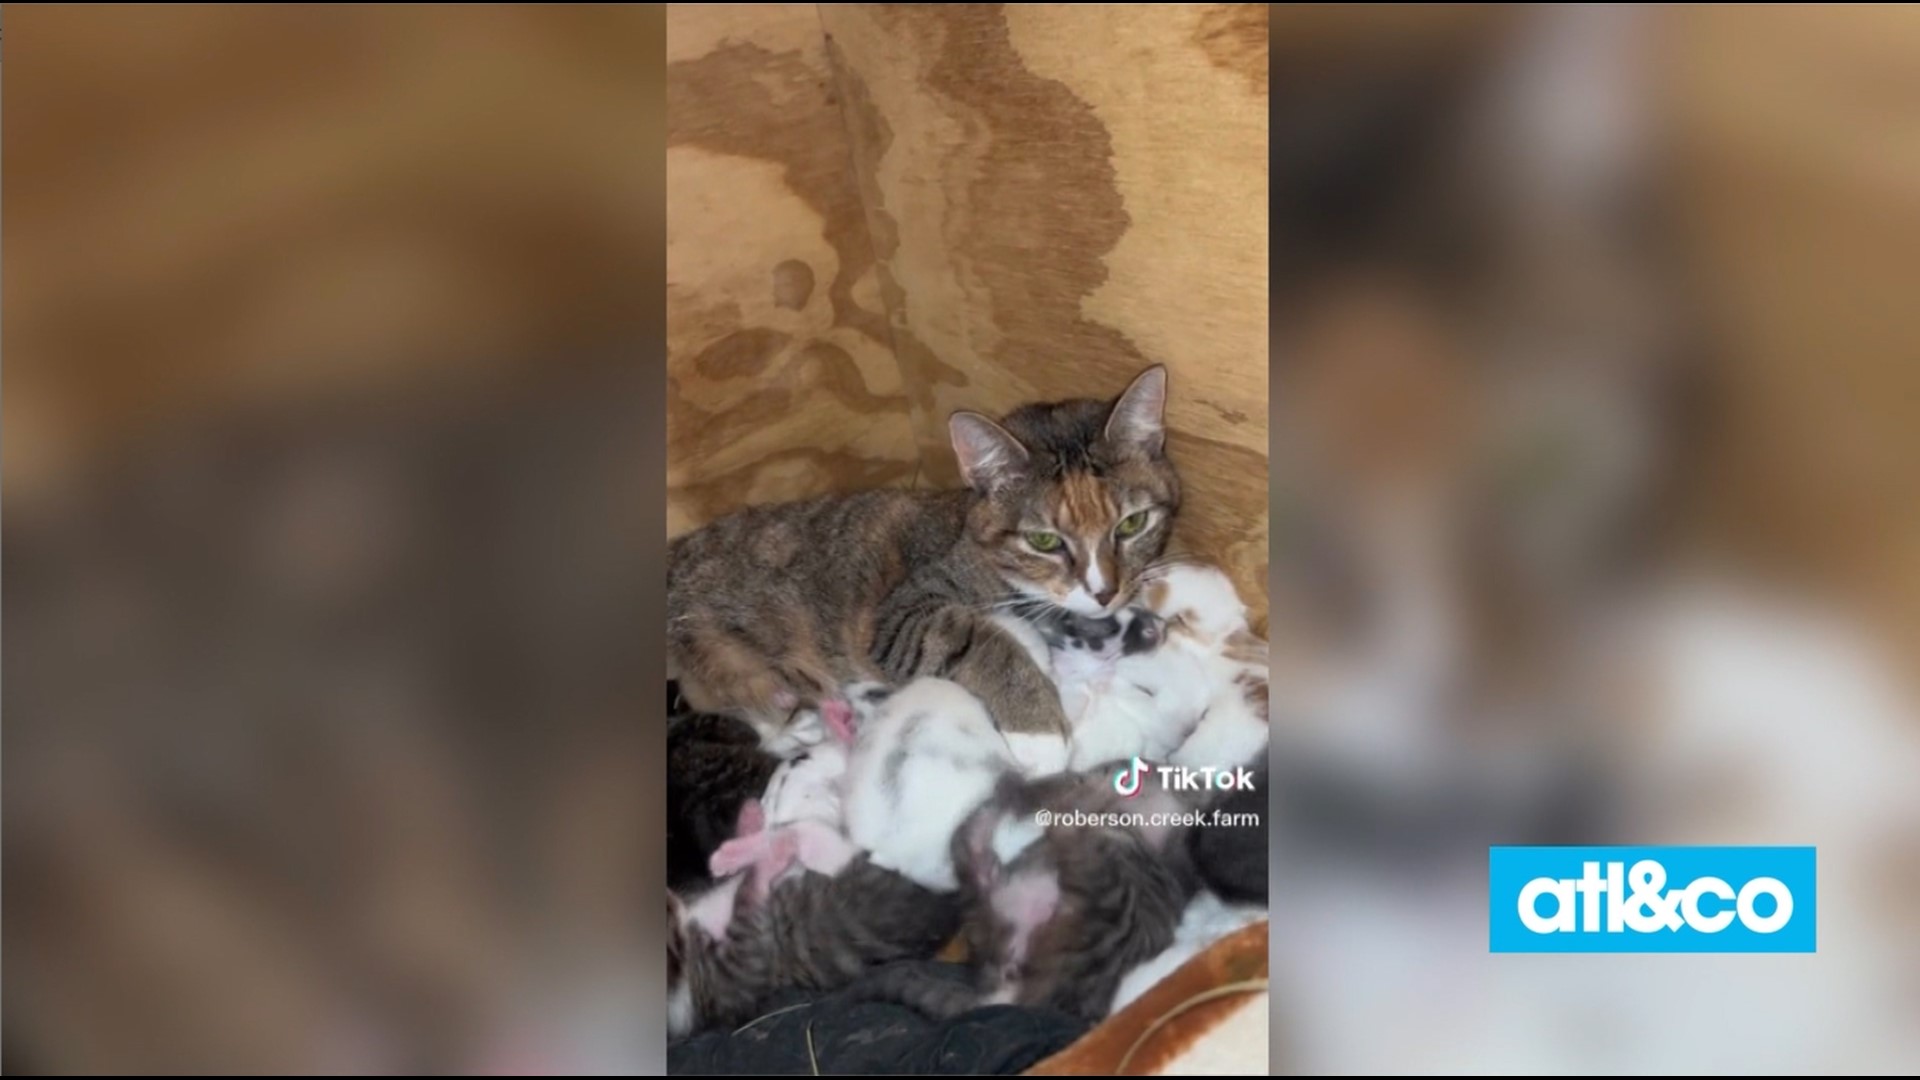 The sweetest furry friends! A cat and rabbit teamed up to co-parent their litters and feed each other's babies.